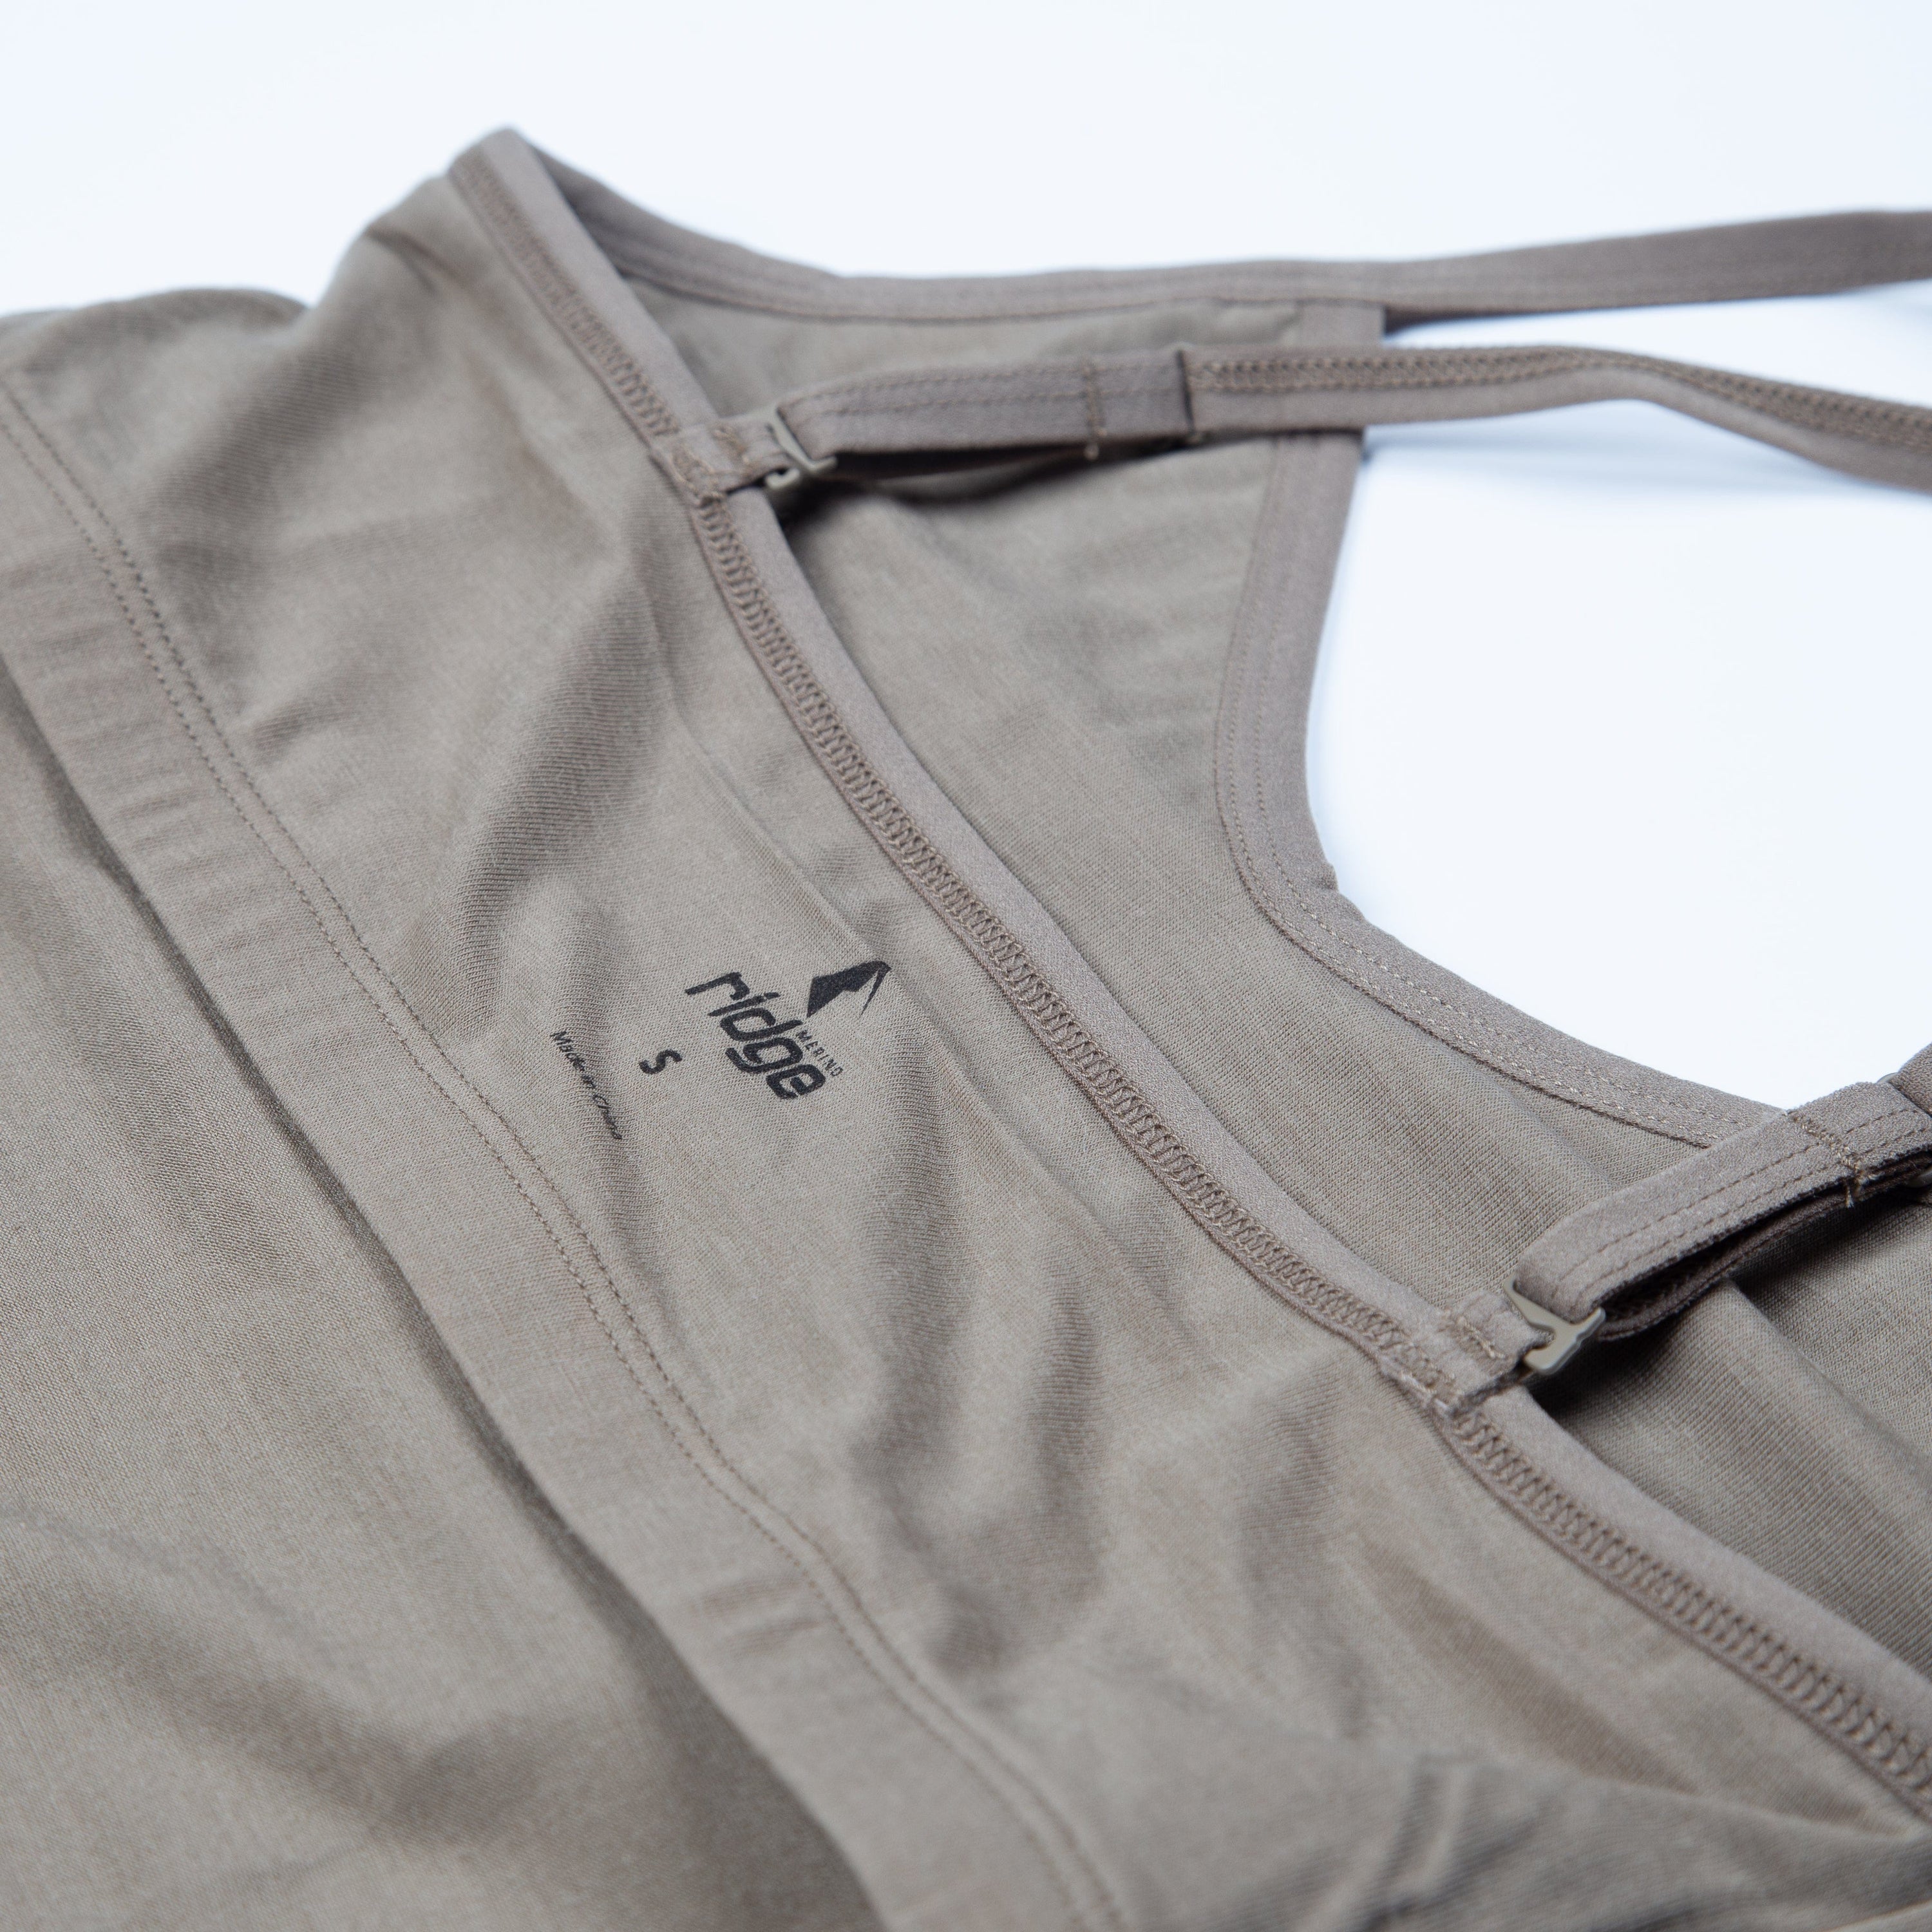 Detail view of the back of the Merino Wool Shelf Bra Camisole